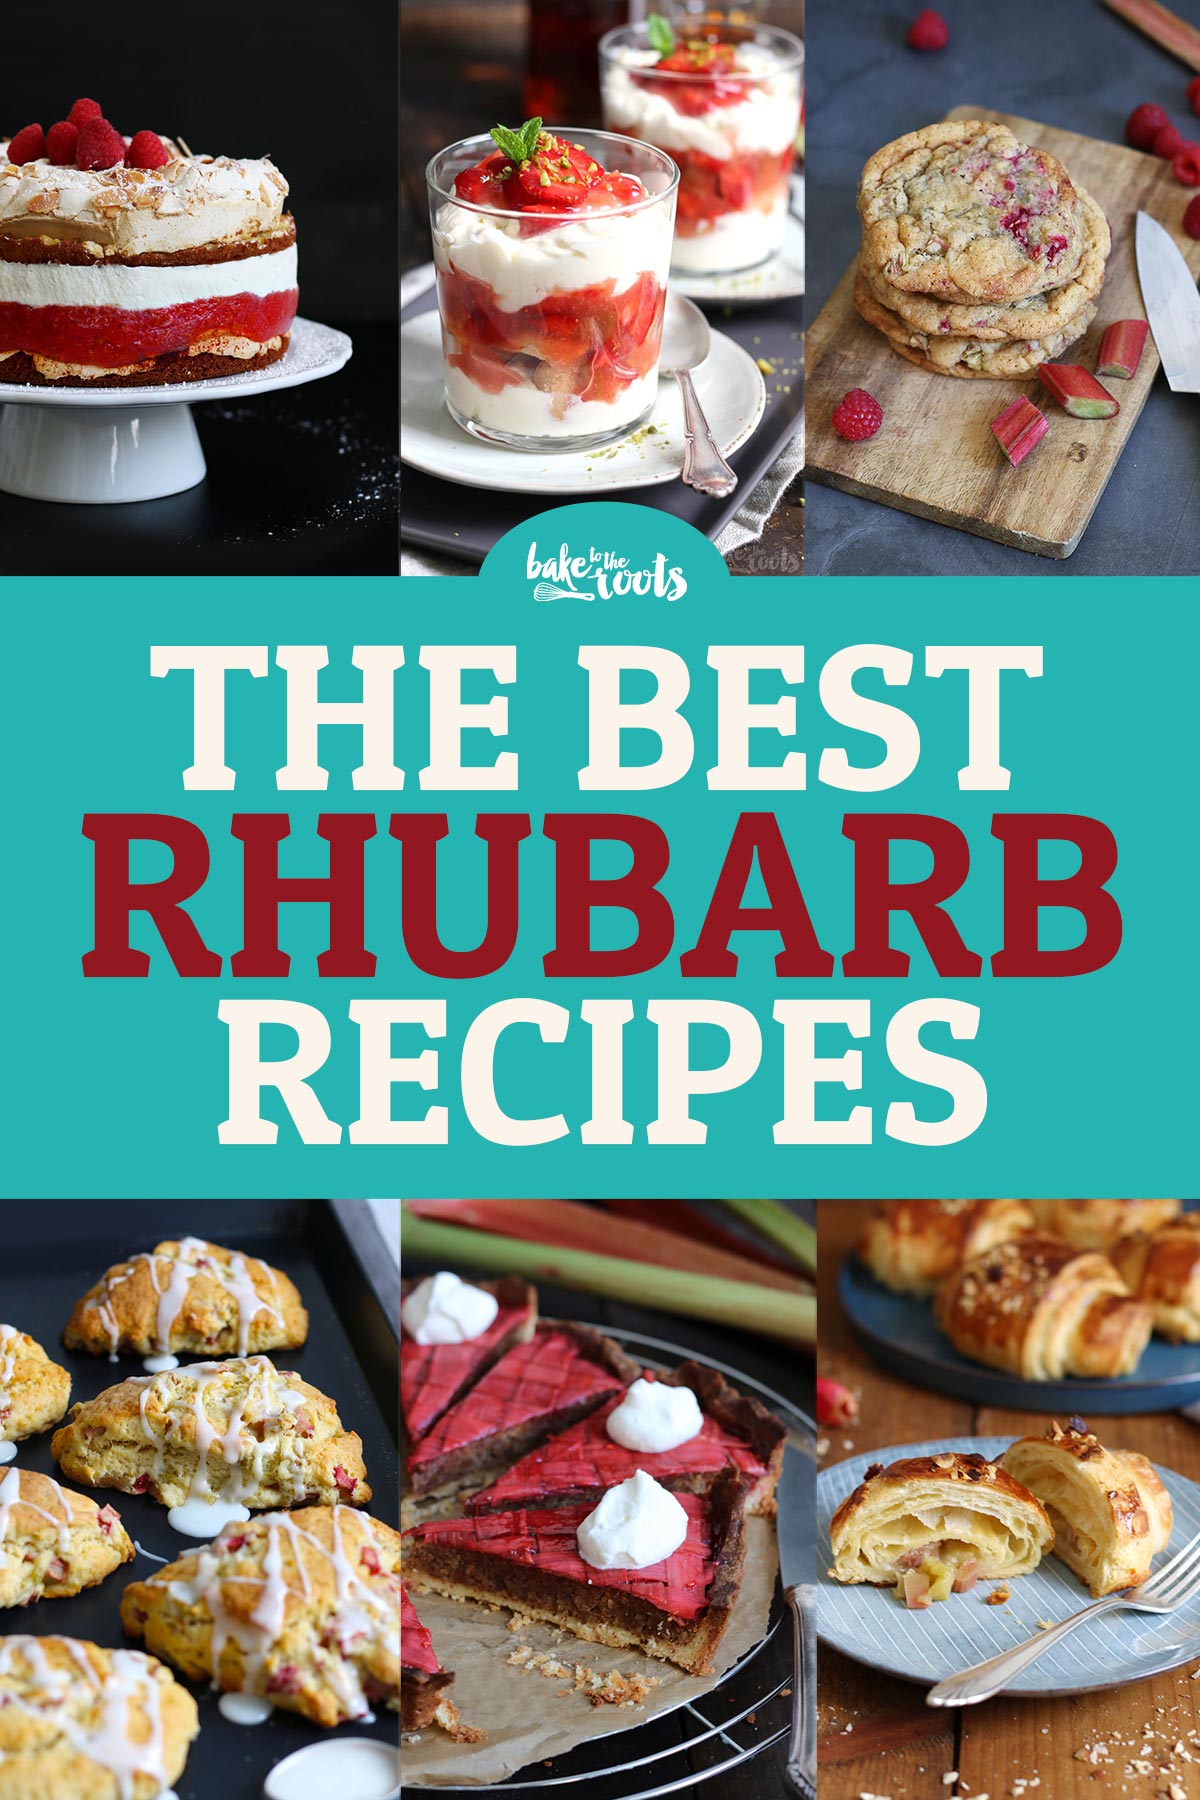 The Best Rhubarb Recipes – All you need for spring!